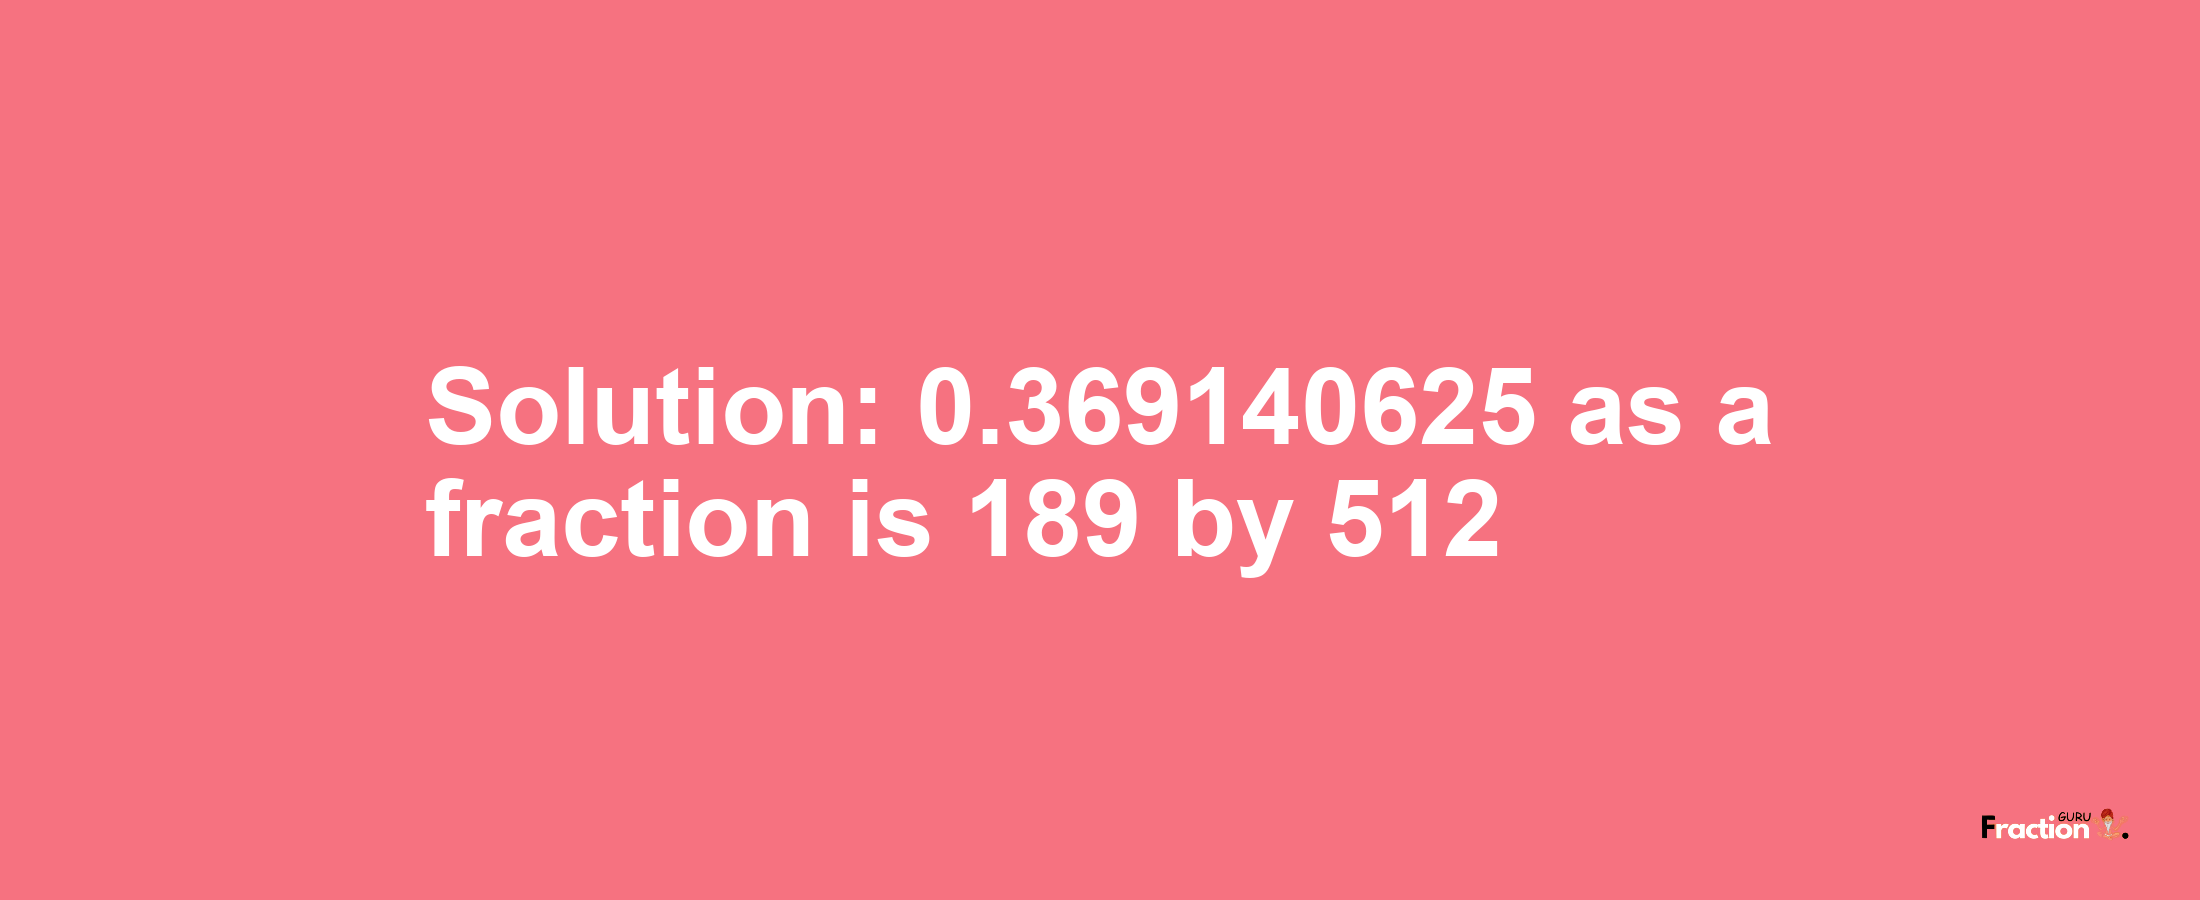 Solution:0.369140625 as a fraction is 189/512